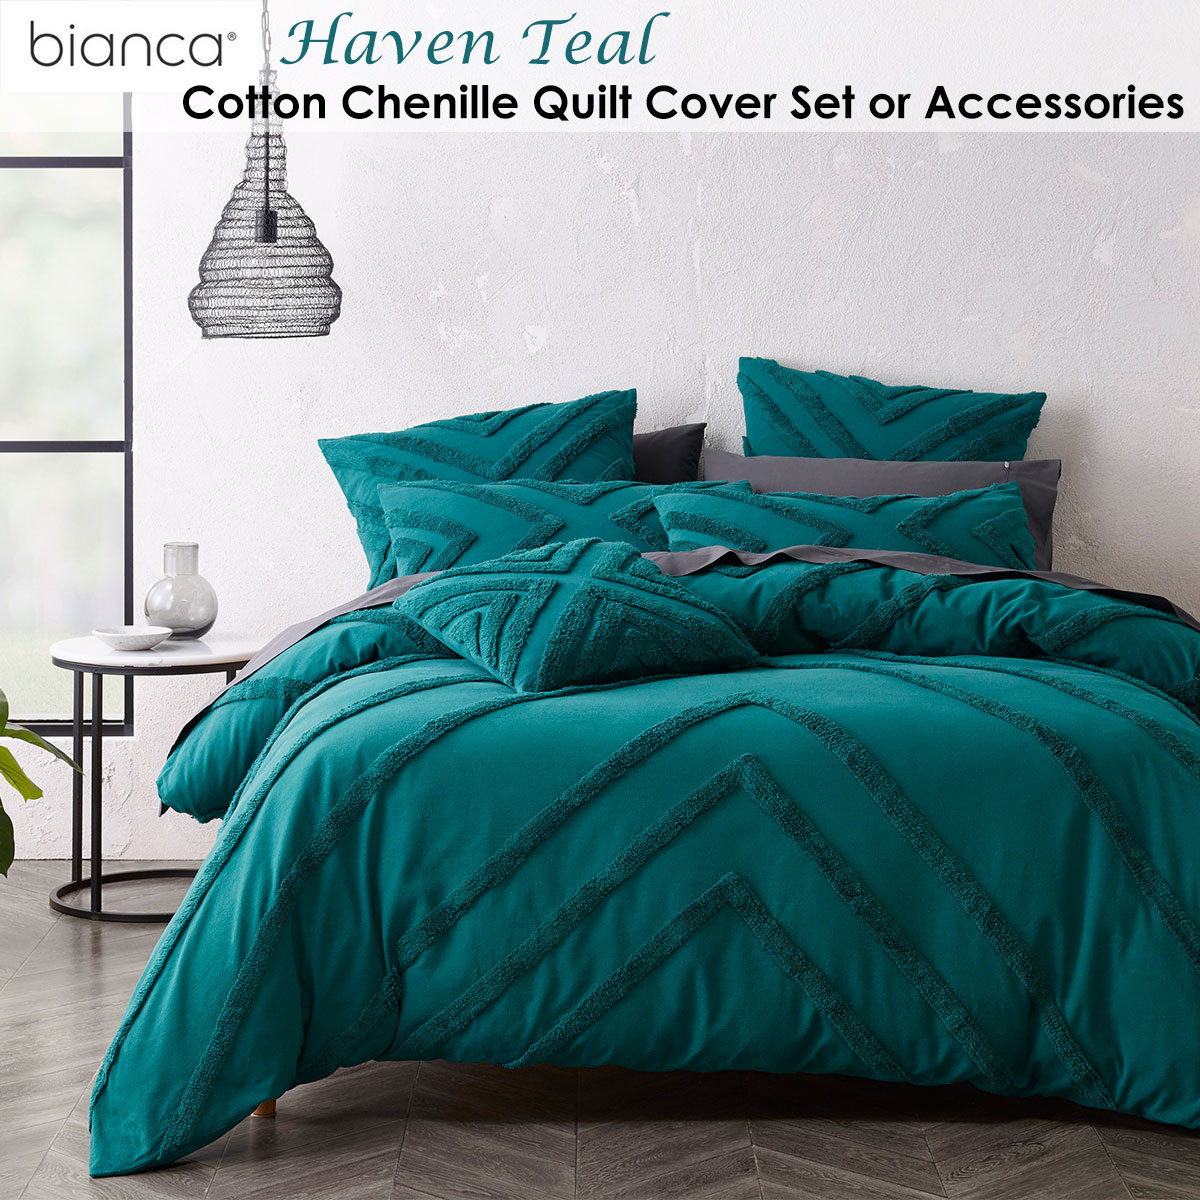 Haven Teal Cotton Chenille Quilt Cover Set or Accessories by Bianca